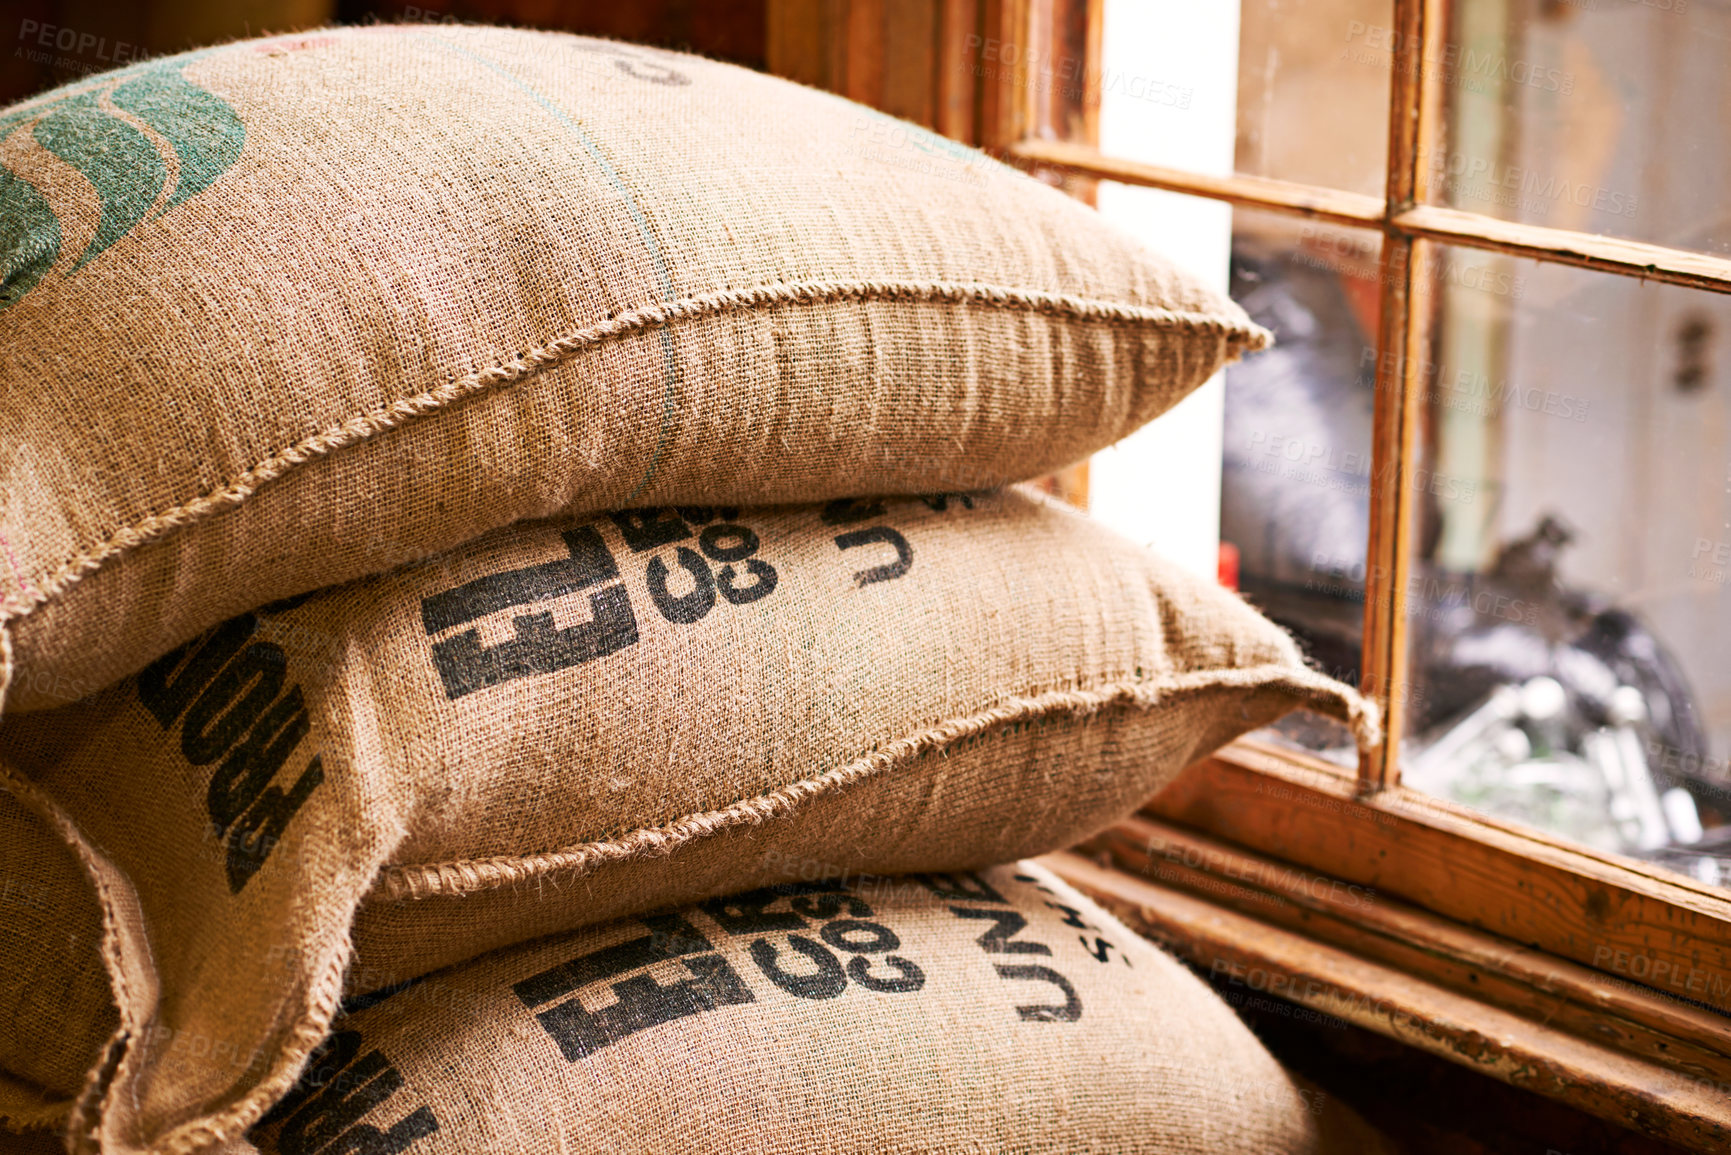 Buy stock photo Shot of a burlap sack full of unprocessed coffee beans